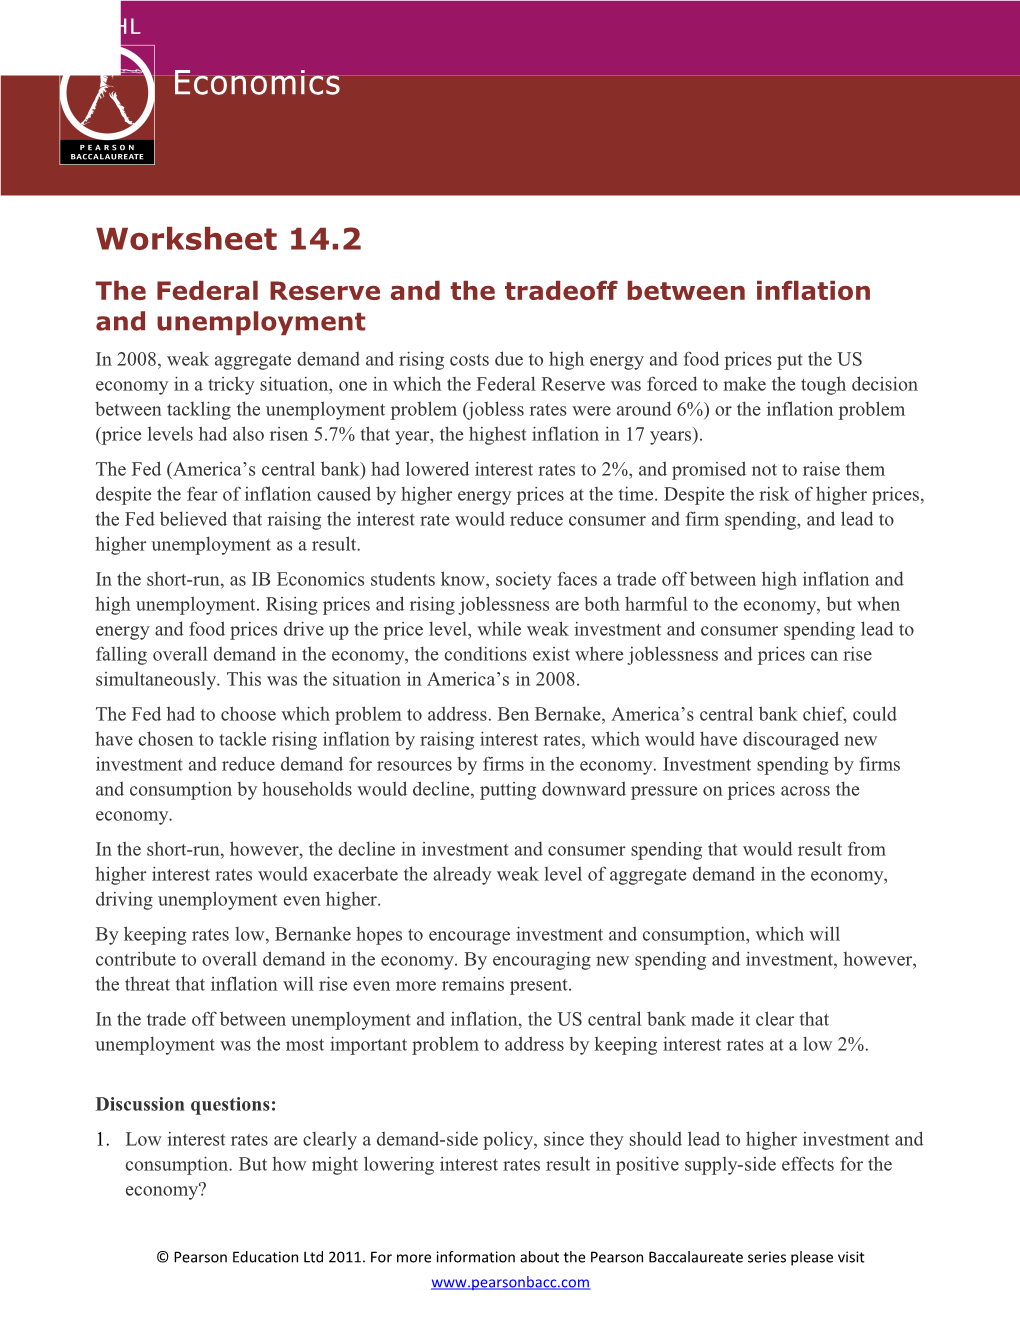 The Federal Reserve and the Tradeoff Between Inflation and Unemployment